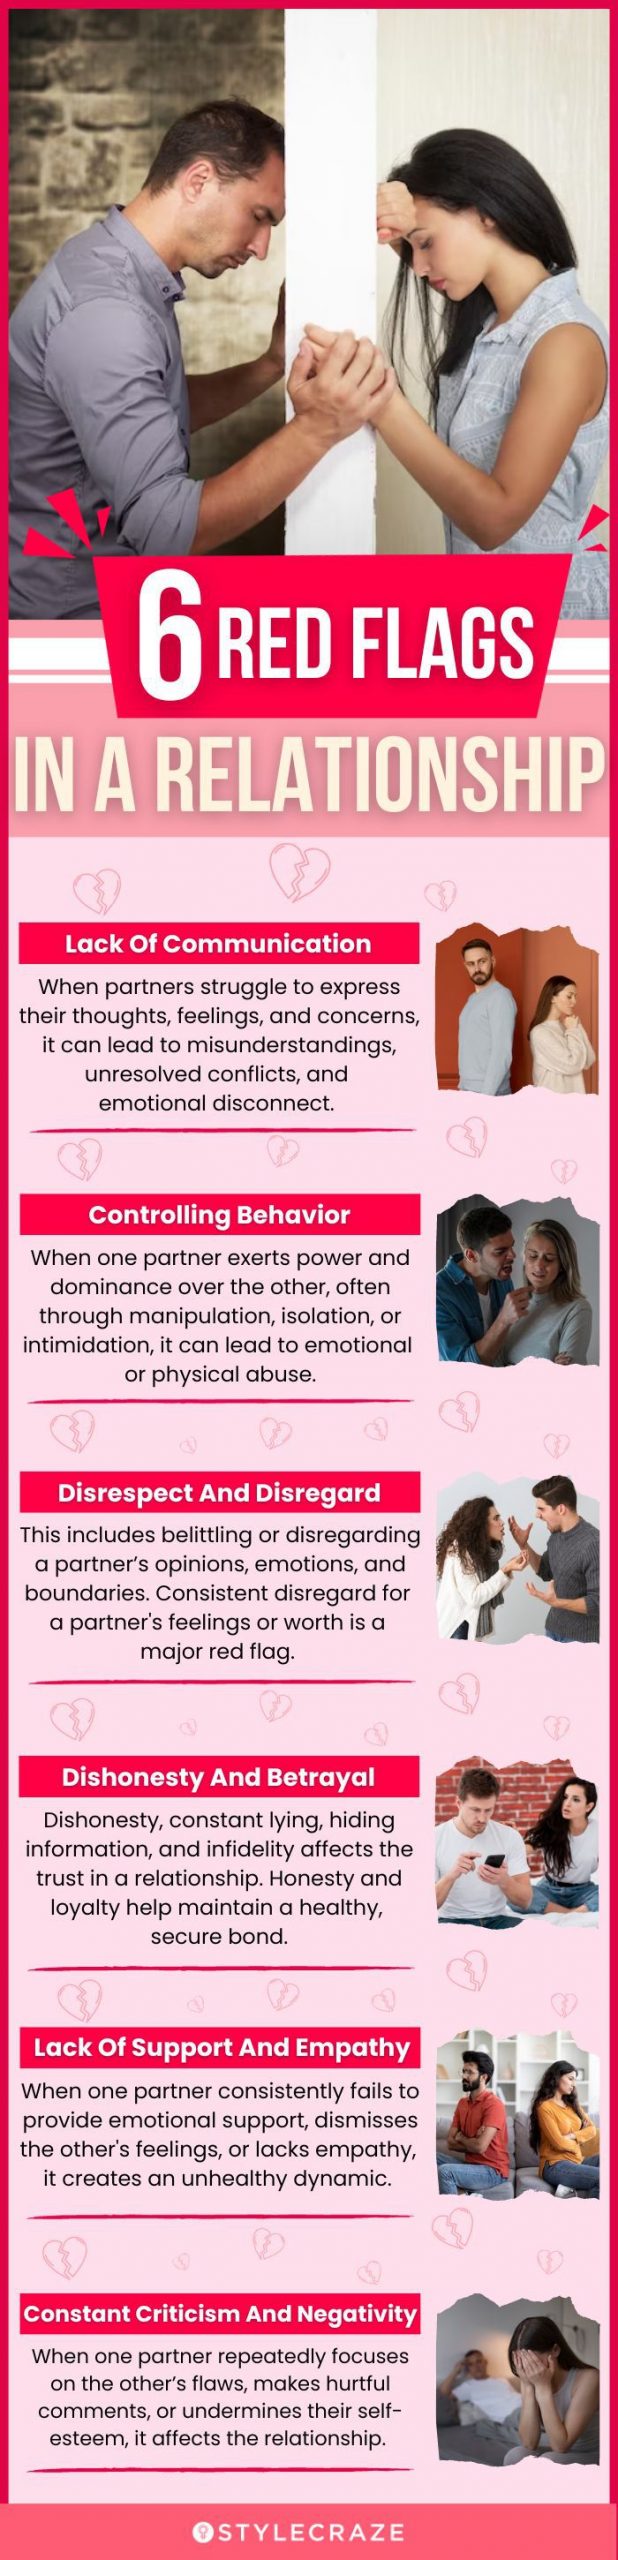 20 Relationship Red Flags to Watch Out For — Signs You Should Break Up